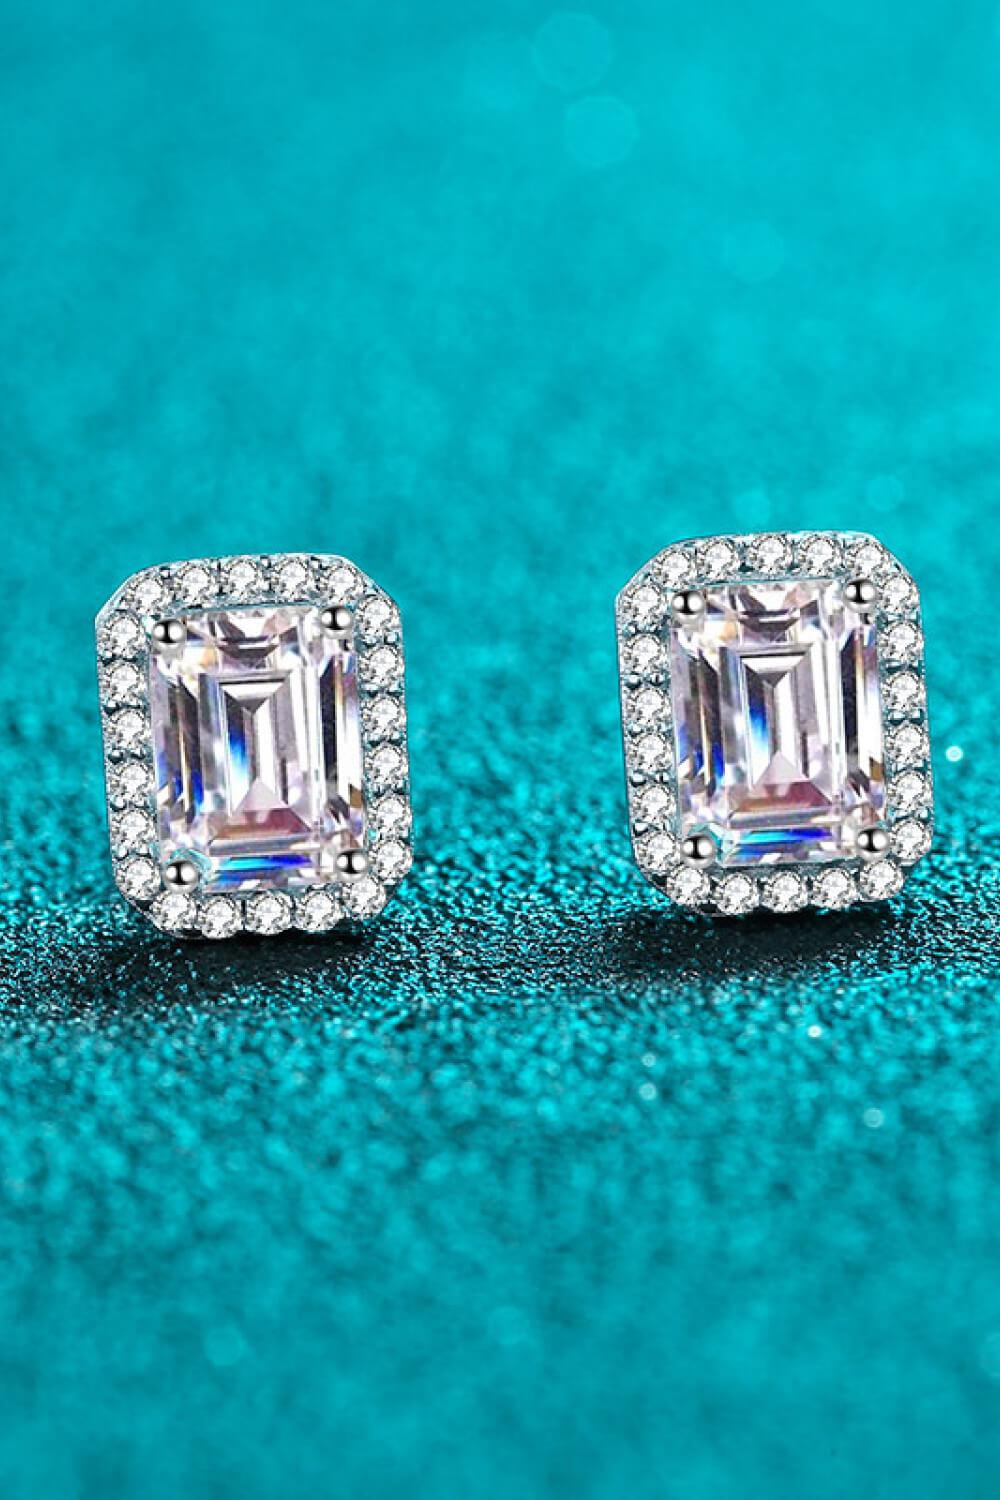 1 Carat Moissanite Rhodium-Plated Square Stud Earrings BLUE ZONE PLANET